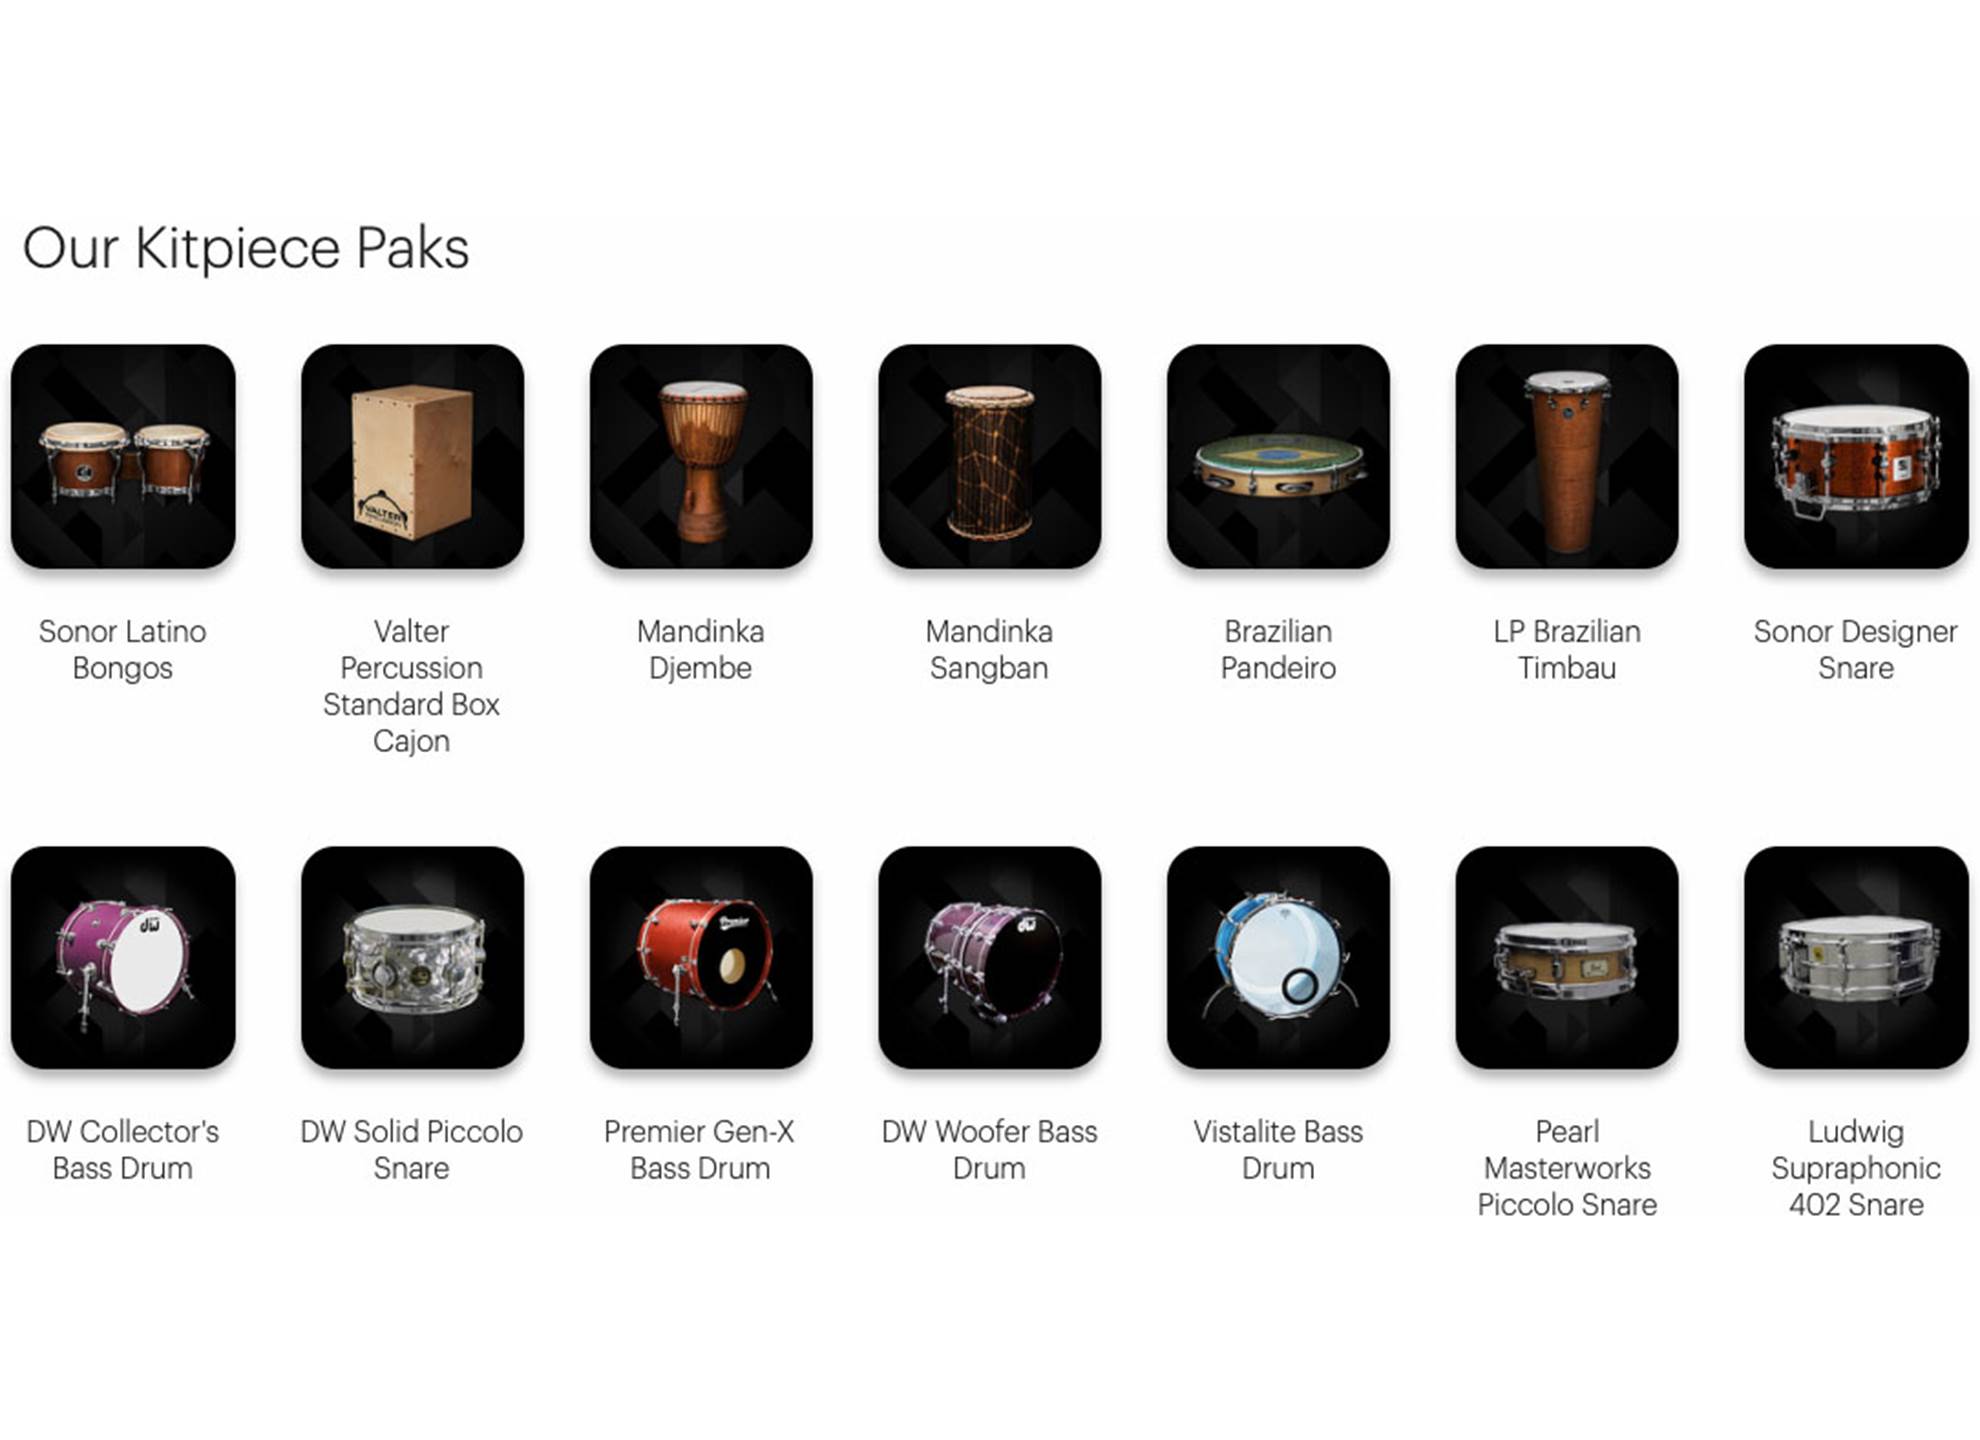 Addictive Drums 2: Custom Collection